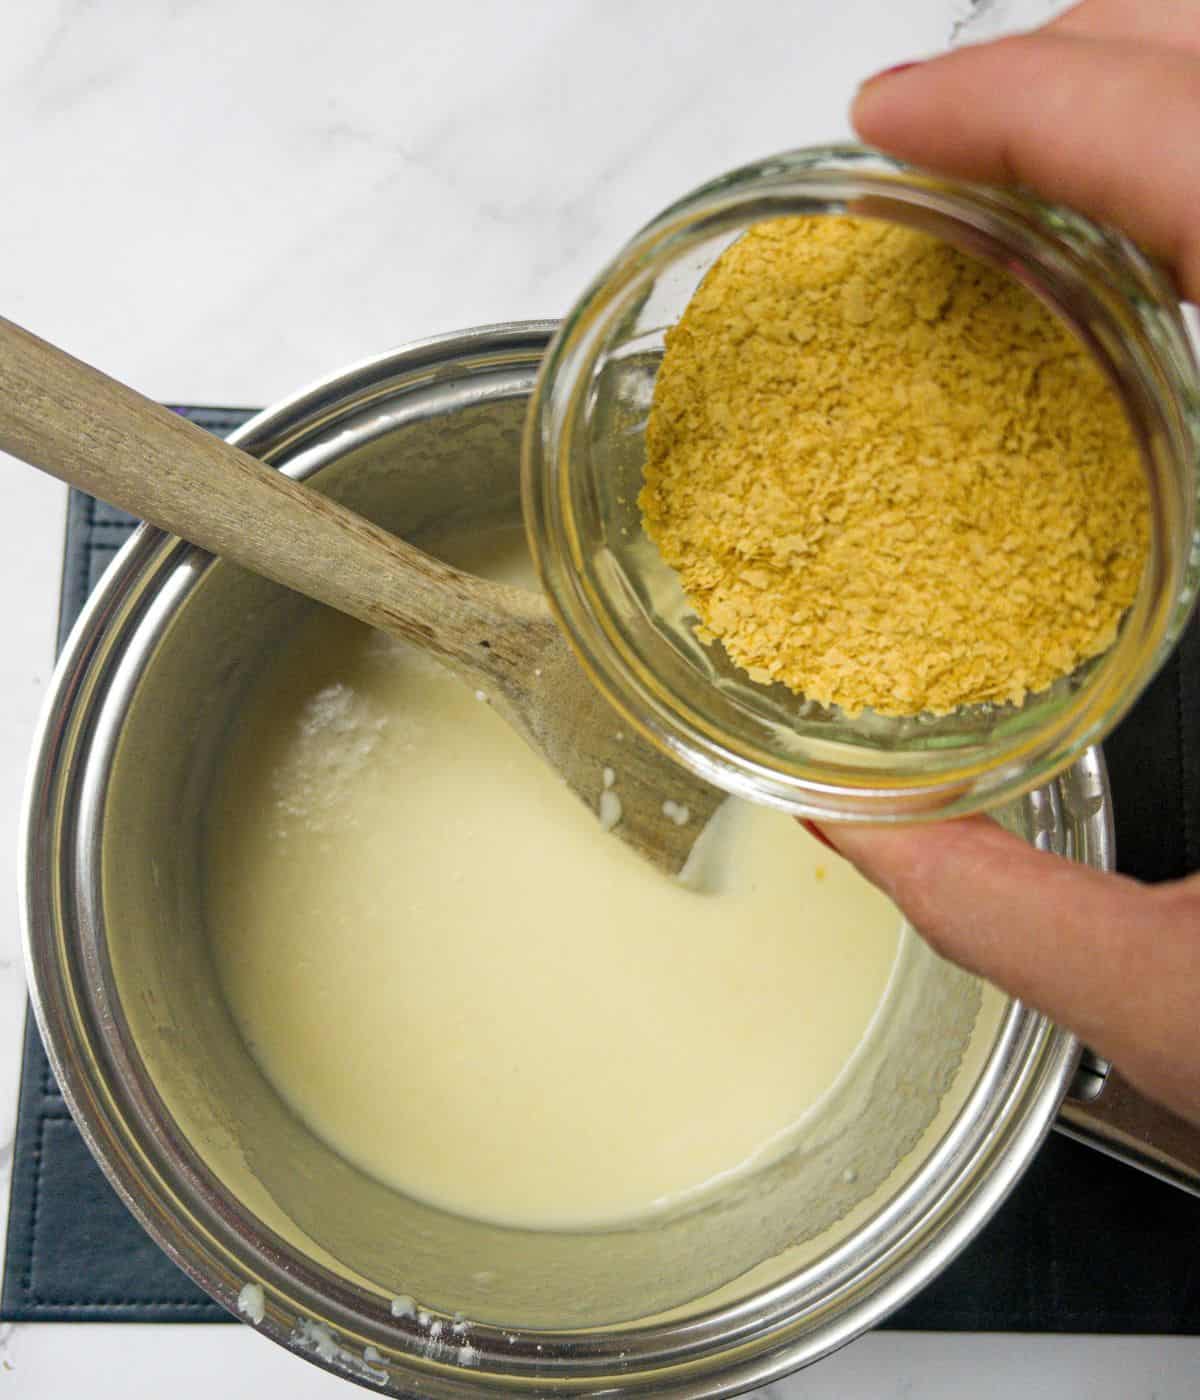 Nutritional yeast being poured into a white sauce in a saucepan.